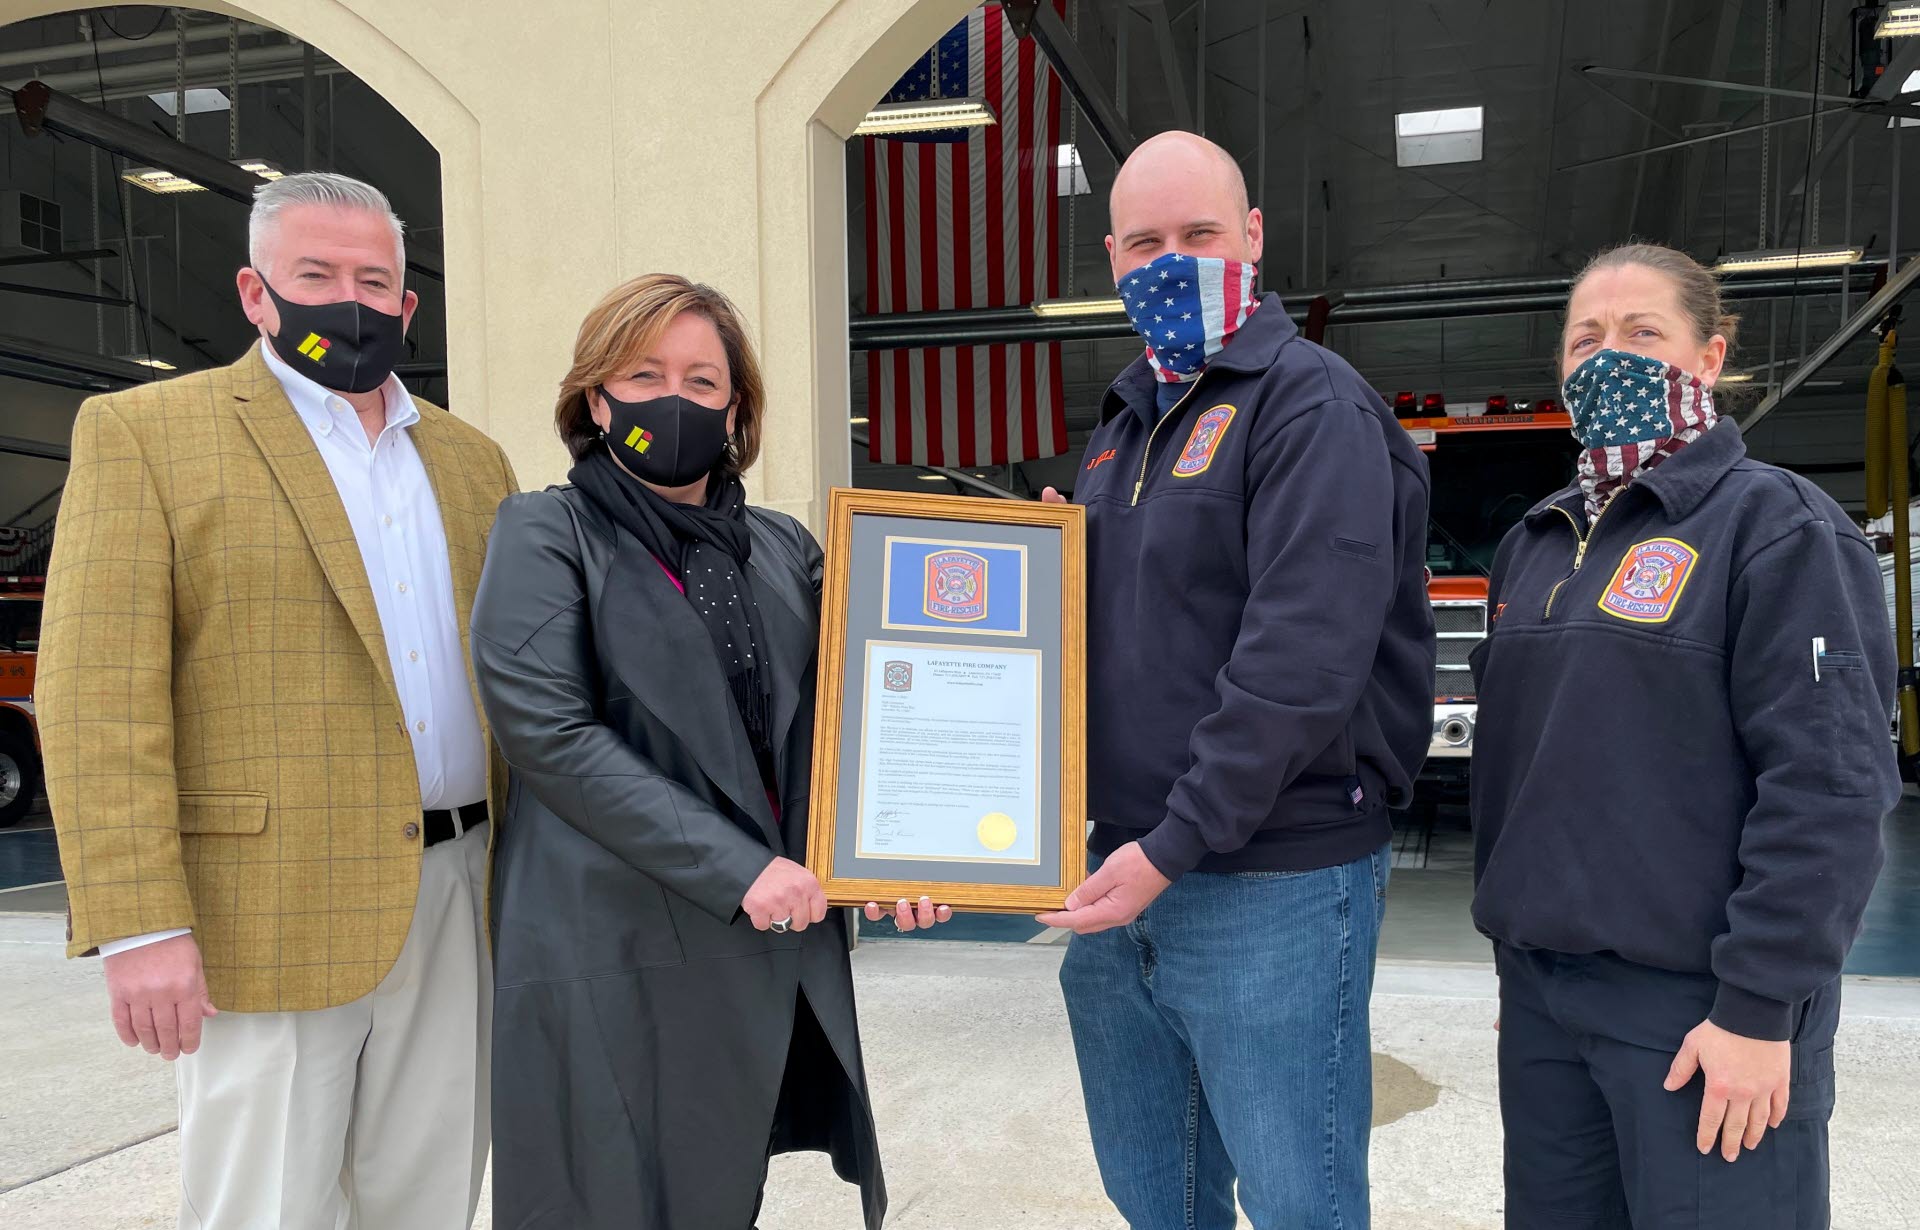 Lafayette Fire Company acknowledged High Companies' years of support with a commemorative plaque. From left to right: Mike Lorelli, Senior V.P. - Commercial Asset Management, High Associates, Ltd.; Robin Stauffer, Assistant Secretary and Executive Director of High Foundation; Jason Beiler, President, and Suzi Sutton, Community Outreach Coordinator, Lafayette Fire Company.